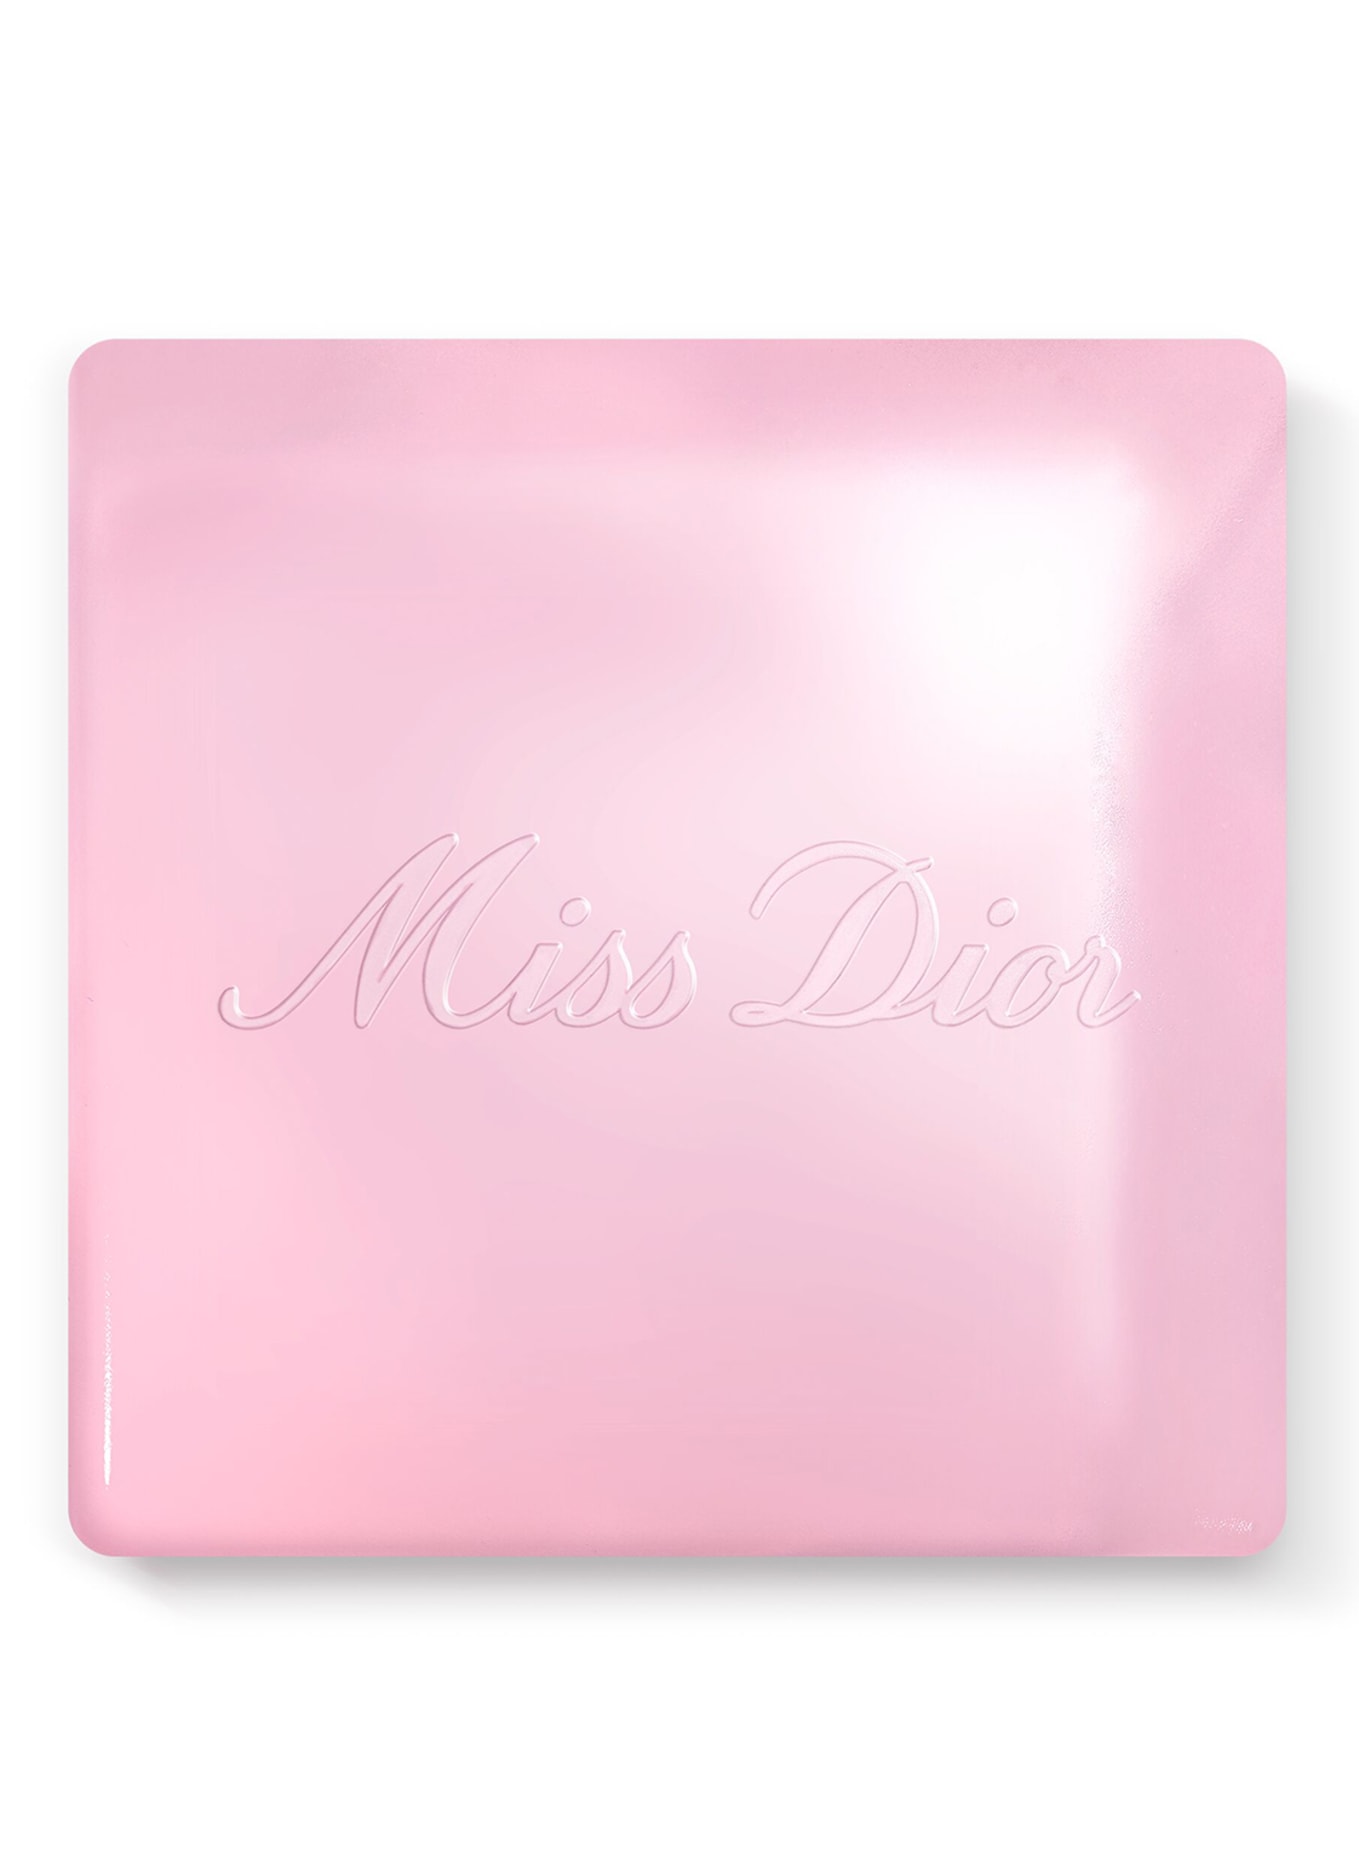 DIOR MISS DIOR BLOOMING SCENTED SOAP (Bild 1)